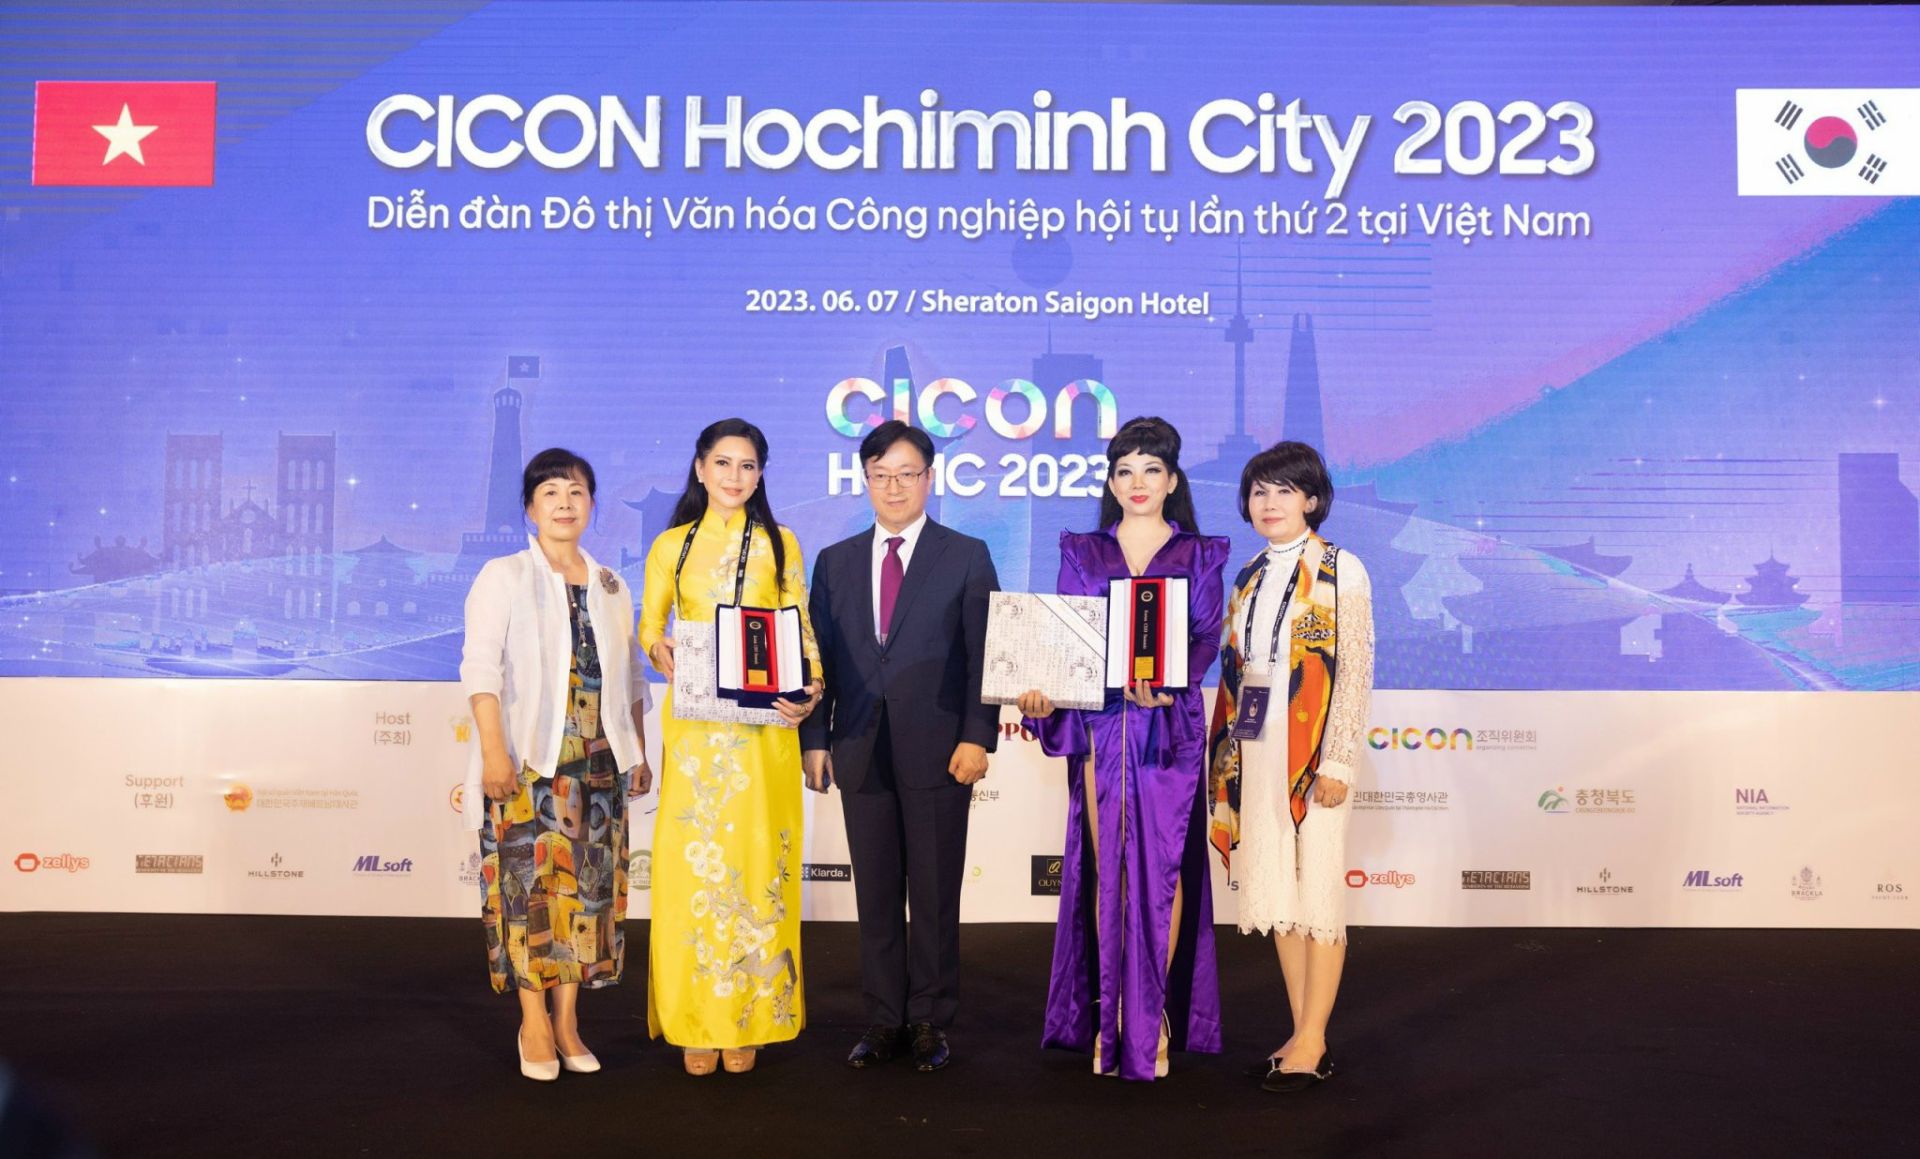 Fashion designer Quynh Paris at the Cicon Ho Chi Minh City 2023 event in Vietnam